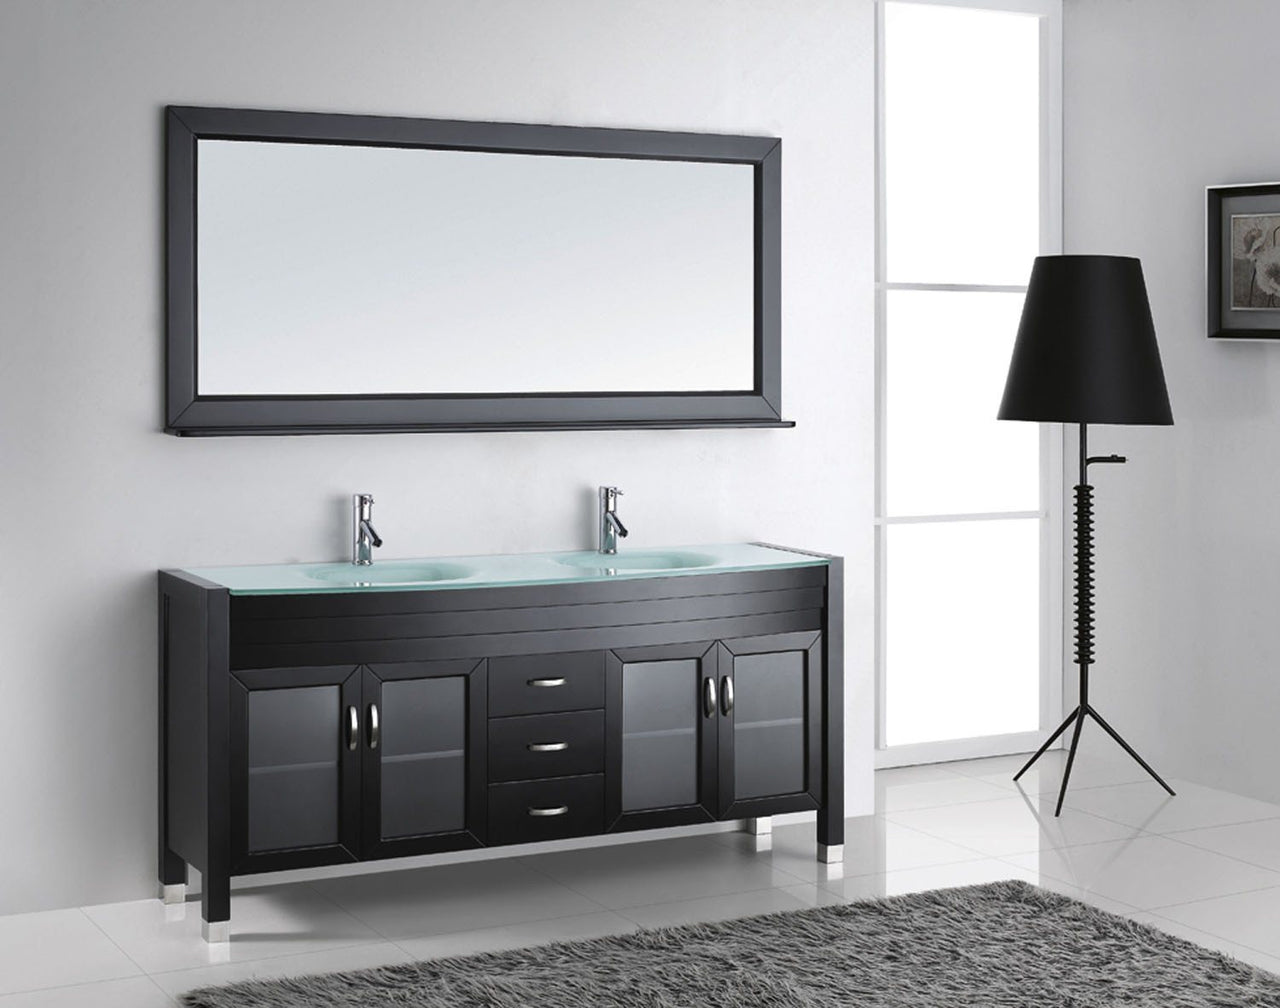 Virtu USA Ava 71" Double Round Sink Espresso Top Vanity in Espresso with Brushed Nickel Faucet and Mirror Vanity Virtu USA 